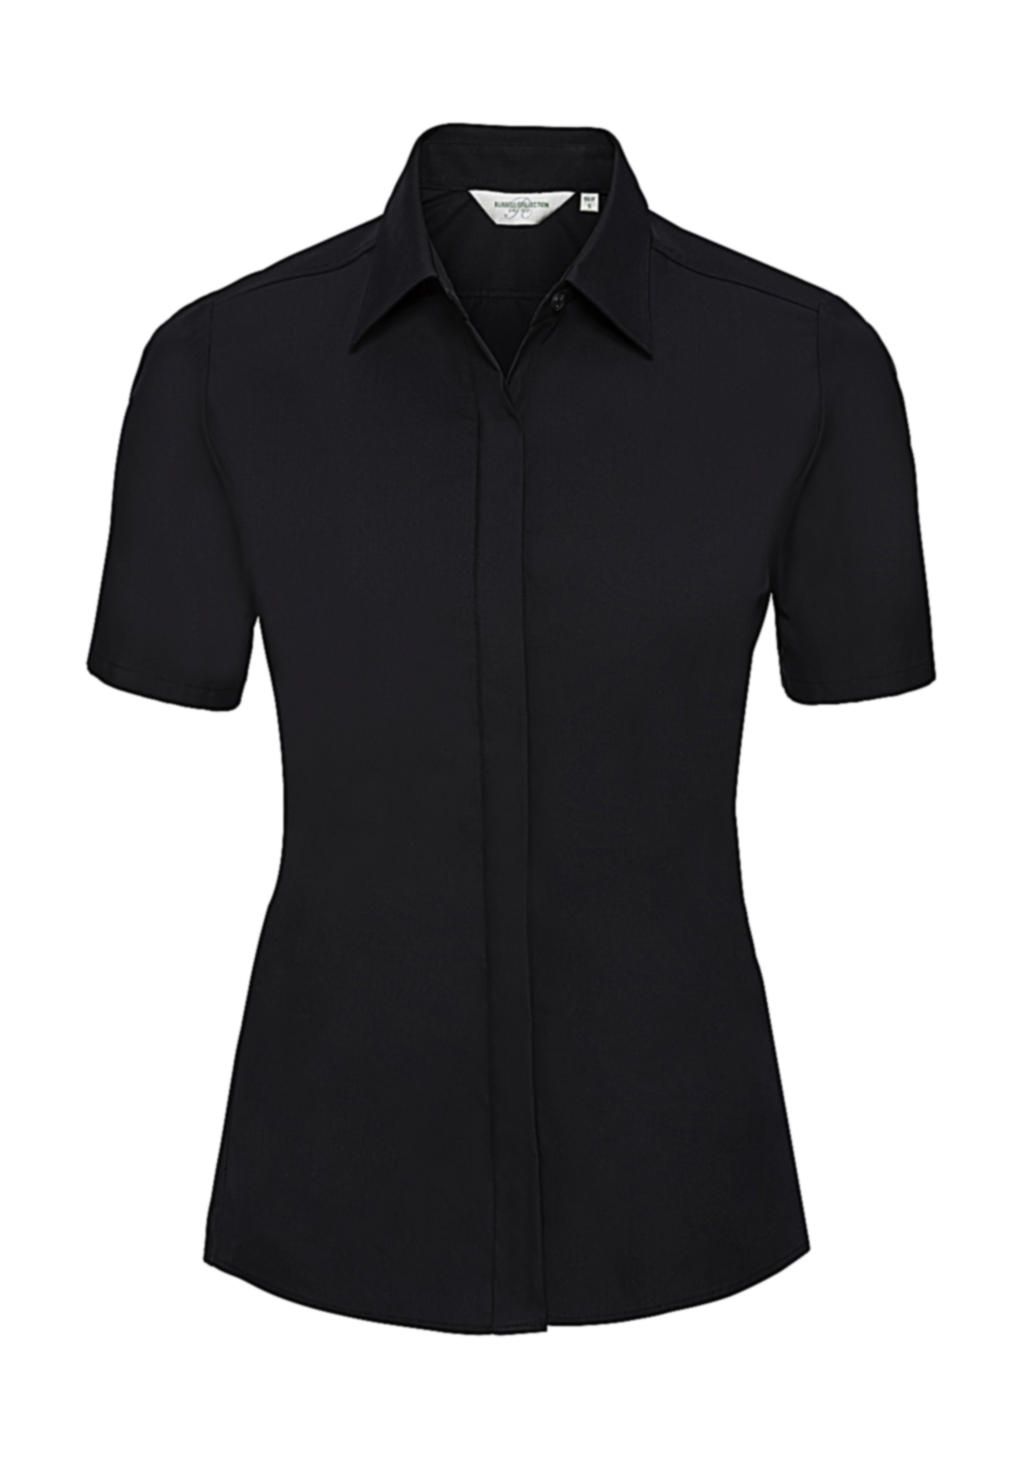  Ladies Ultimate Stretch Shirt in Farbe Black